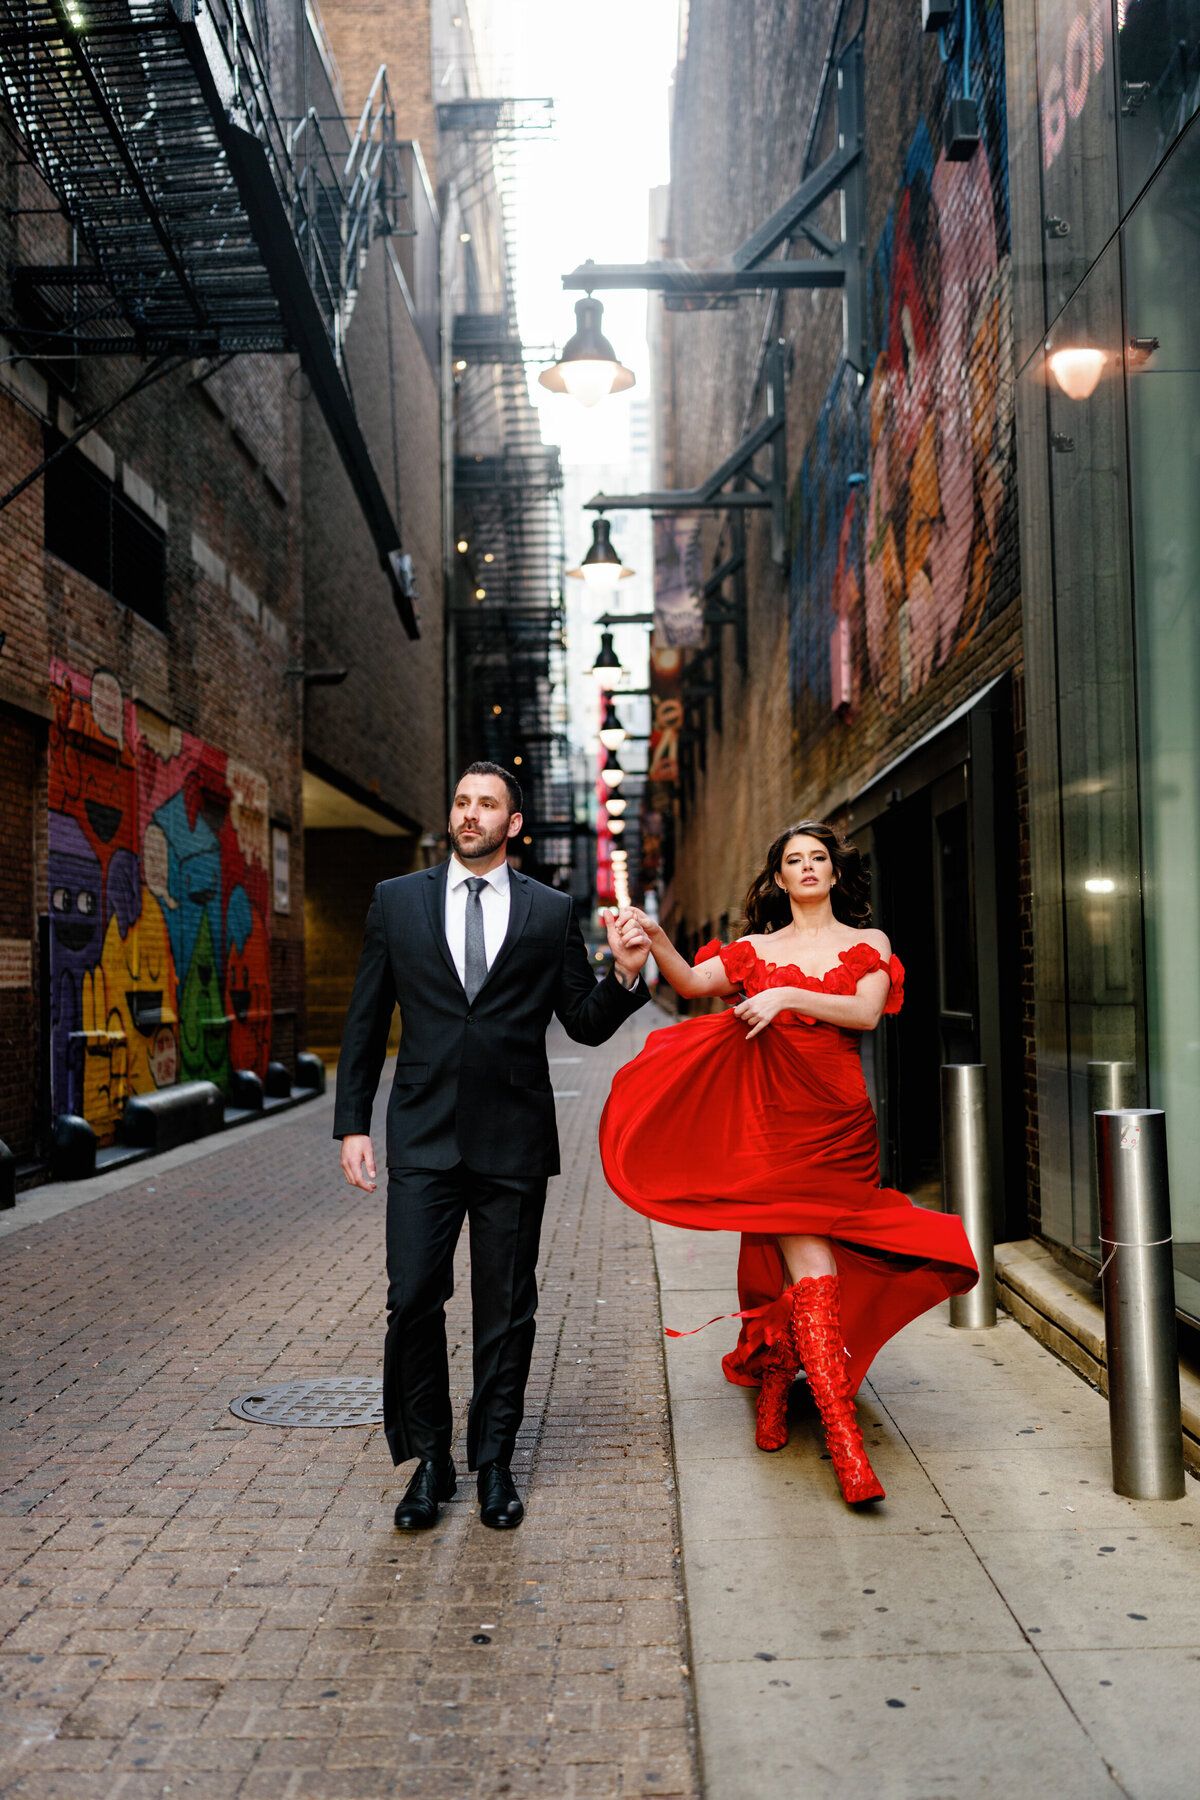 Aspen-Avenue-Chicago-Wedding-Photographer-Union-Station-Chicago-Theater-Engagement-Session-Timeless-Romantic-Red-Dress-Editorial-Stemming-From-Love-Bry-Jean-Artistry-The-Bridal-Collective-True-to-color-Luxury-FAV-105